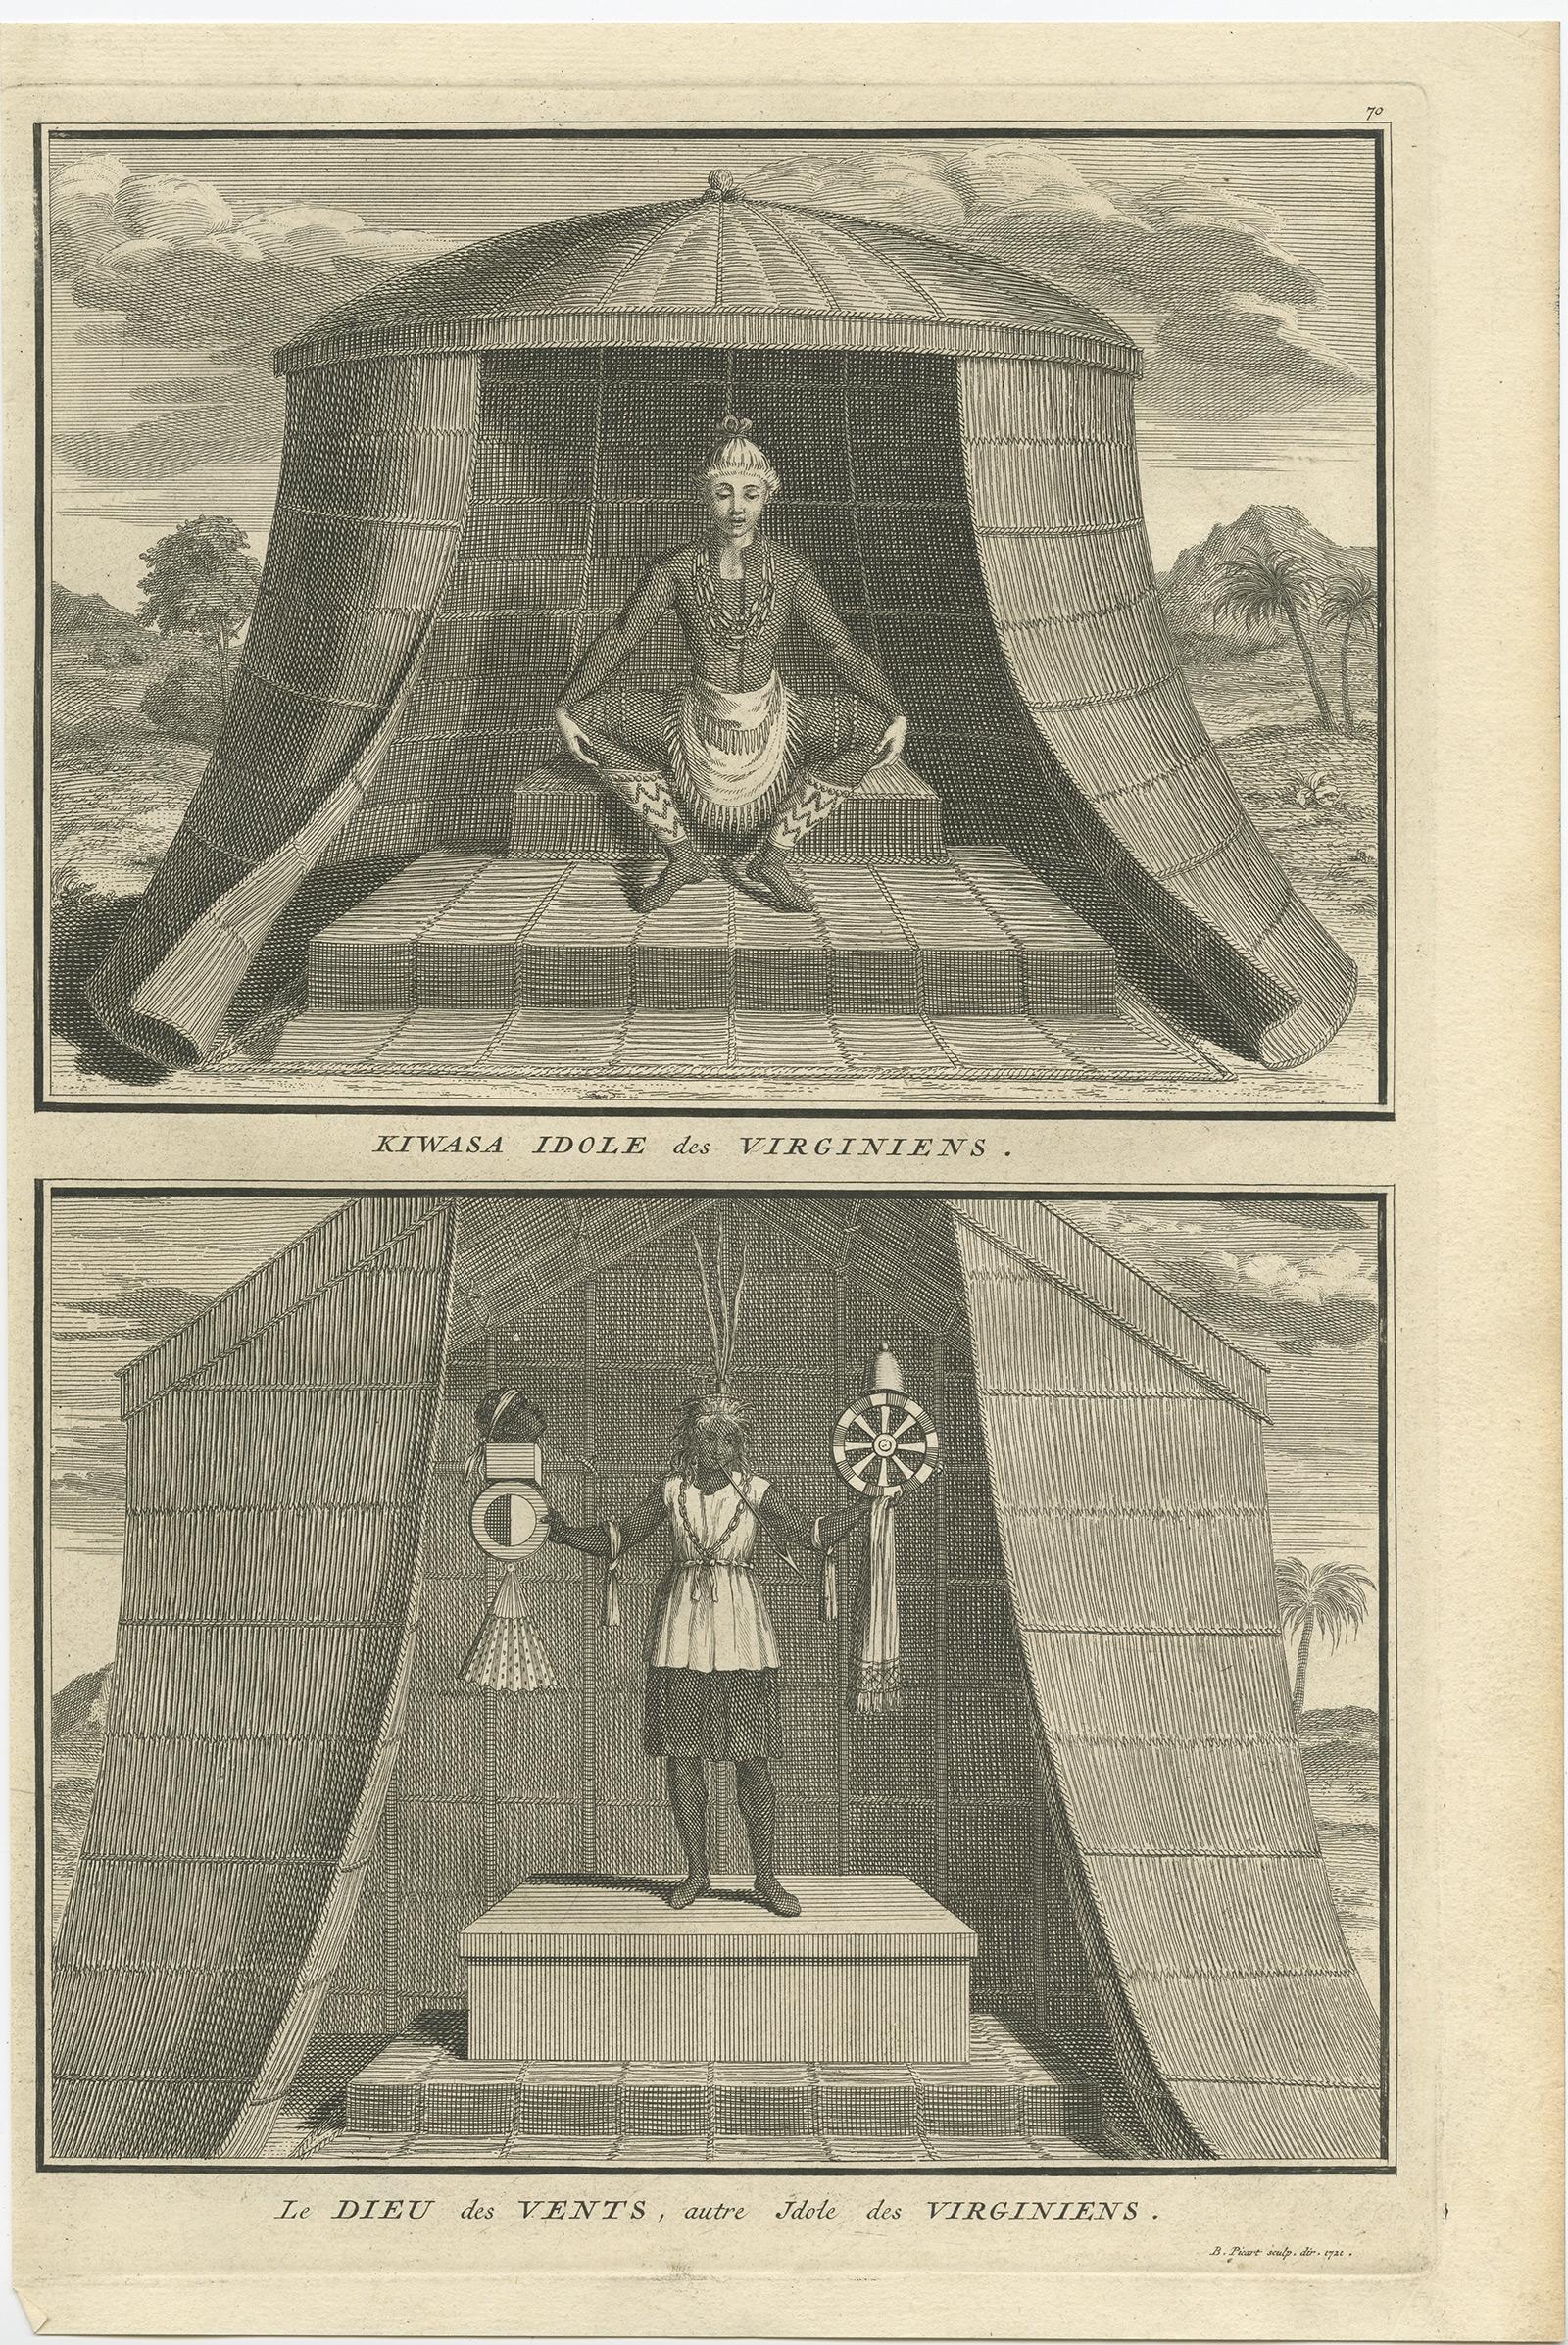 Two religious images on one plate. Upper image 'Kiwasa idole des Virginiens'. 

Kiwasa, this Idol is placed in the temple of the town of Secotam, as the keeper of the king's dead corpses. 

Lower image 'Le Dieu des Vents, autre Idole des